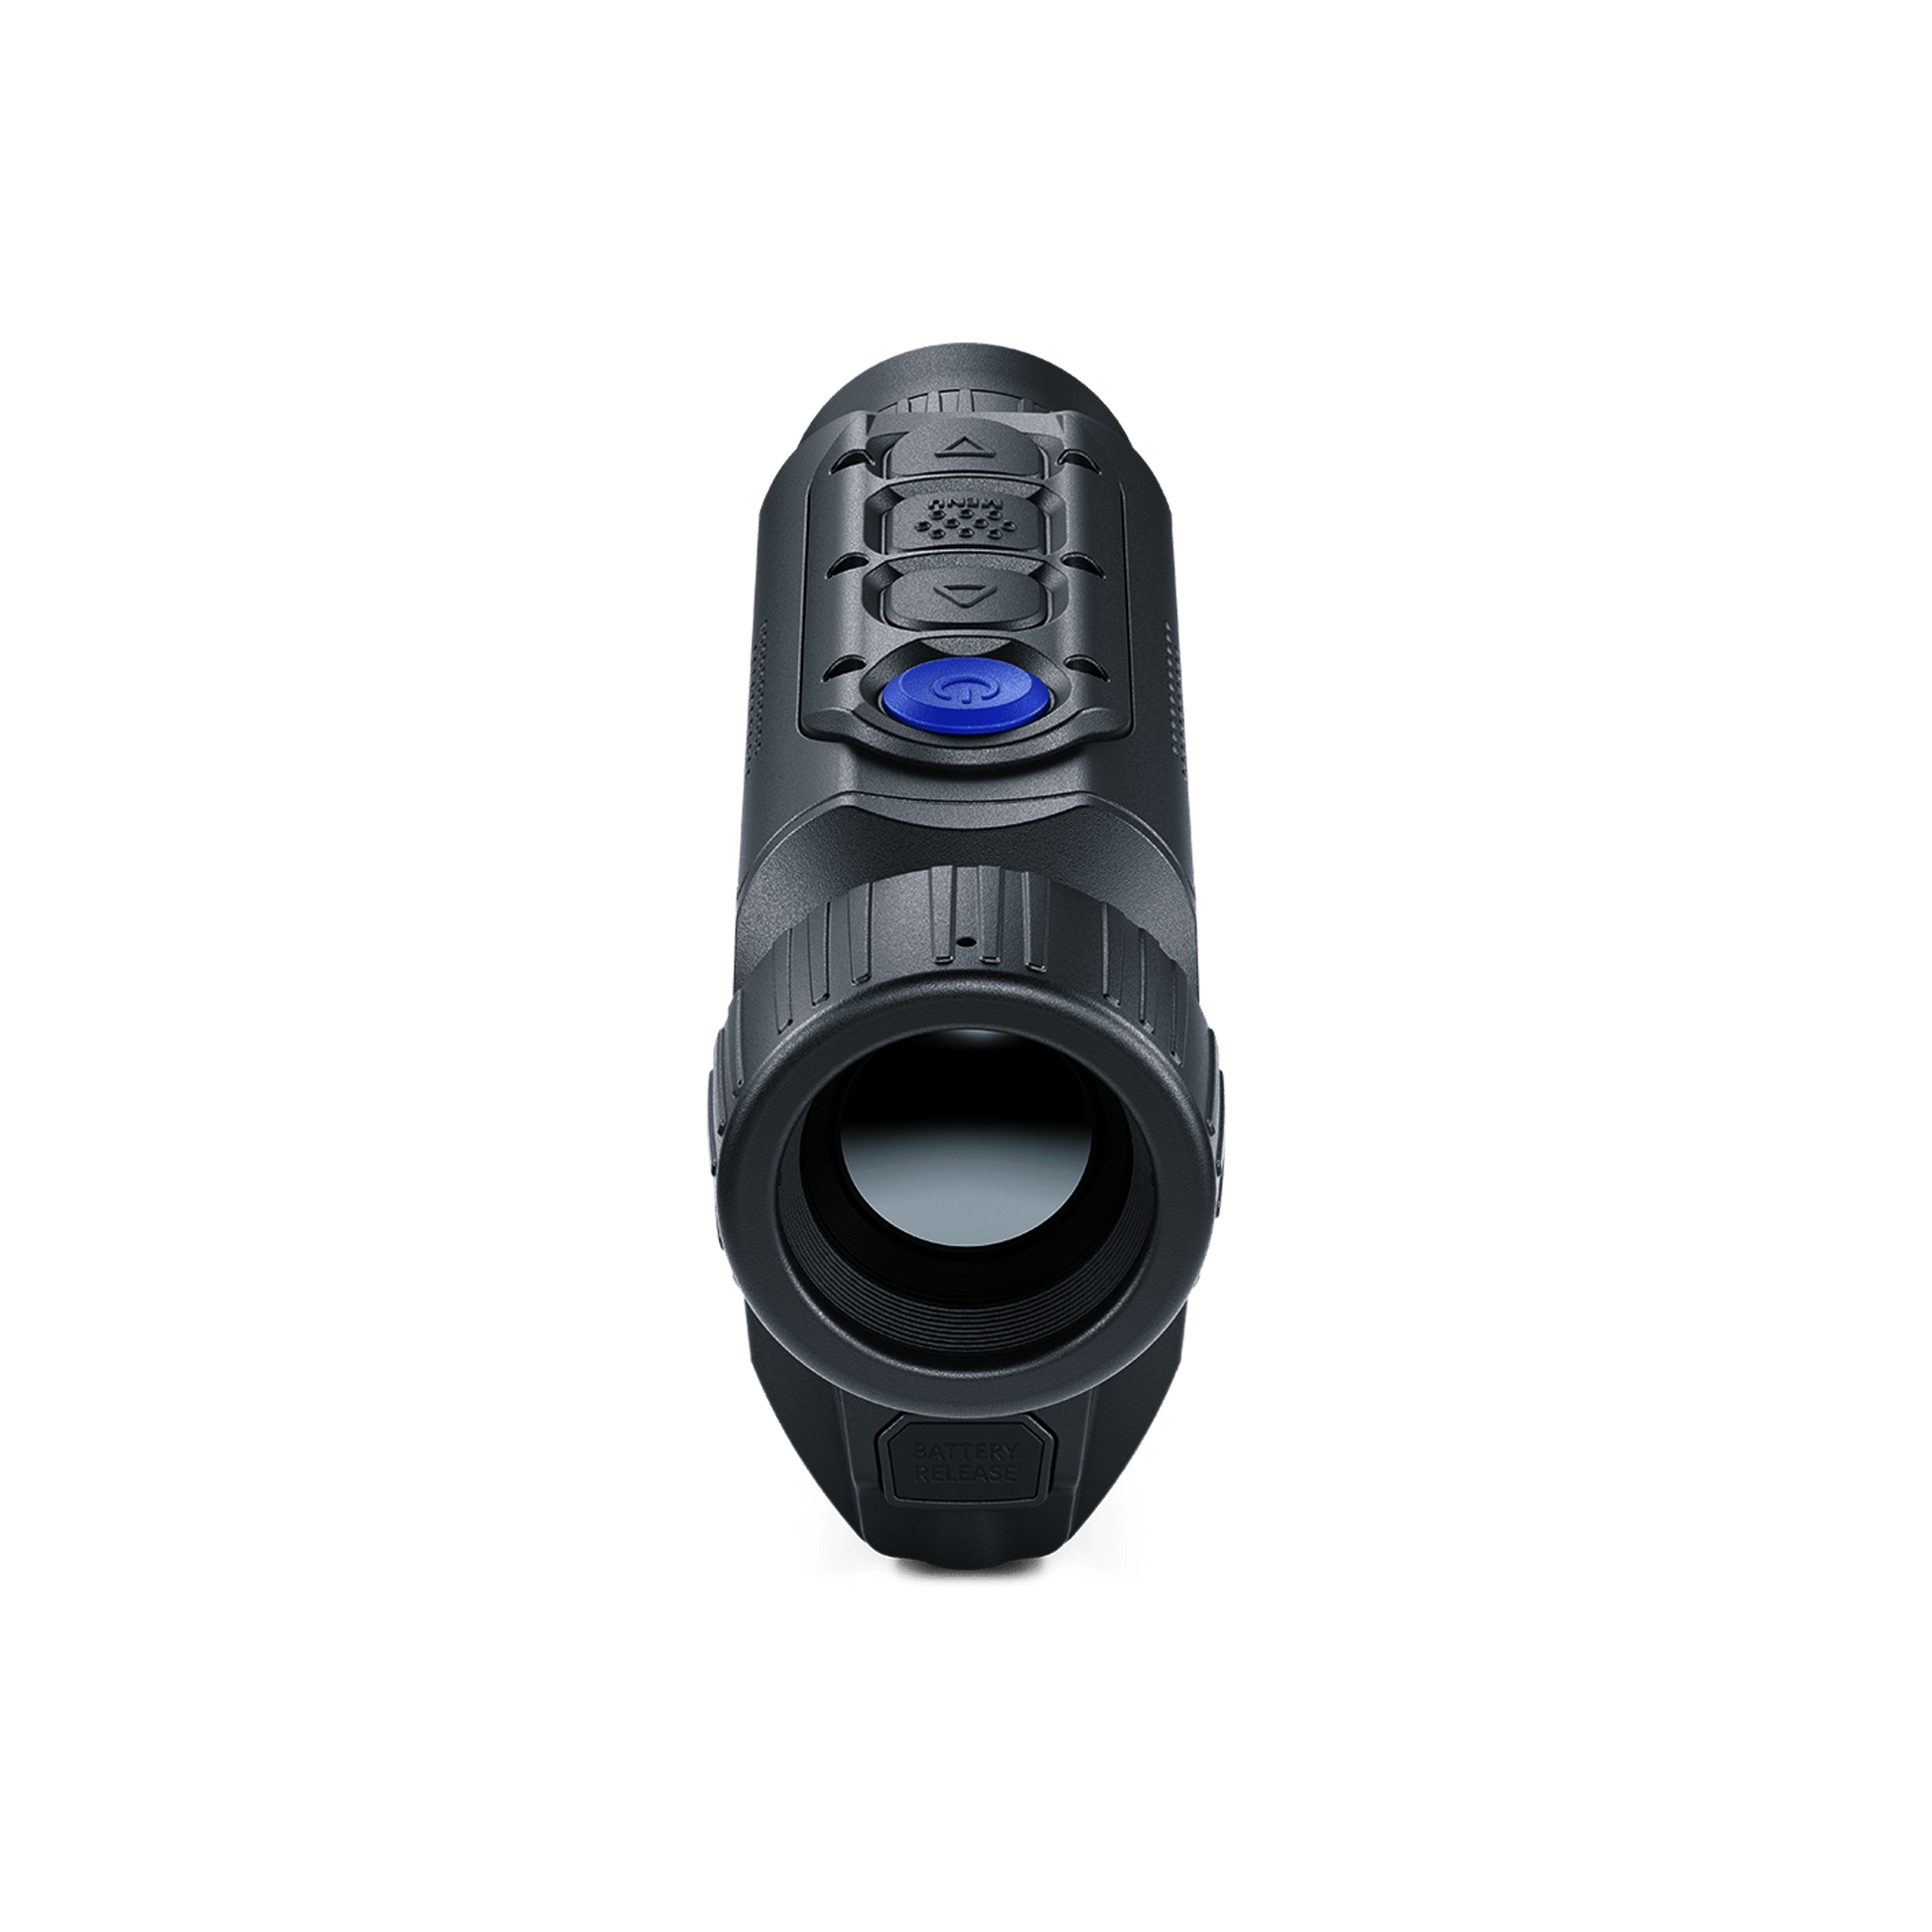 Cape Thermal Pulsar Axion XM30F Handheld Thermal Monocular for Sale Front View